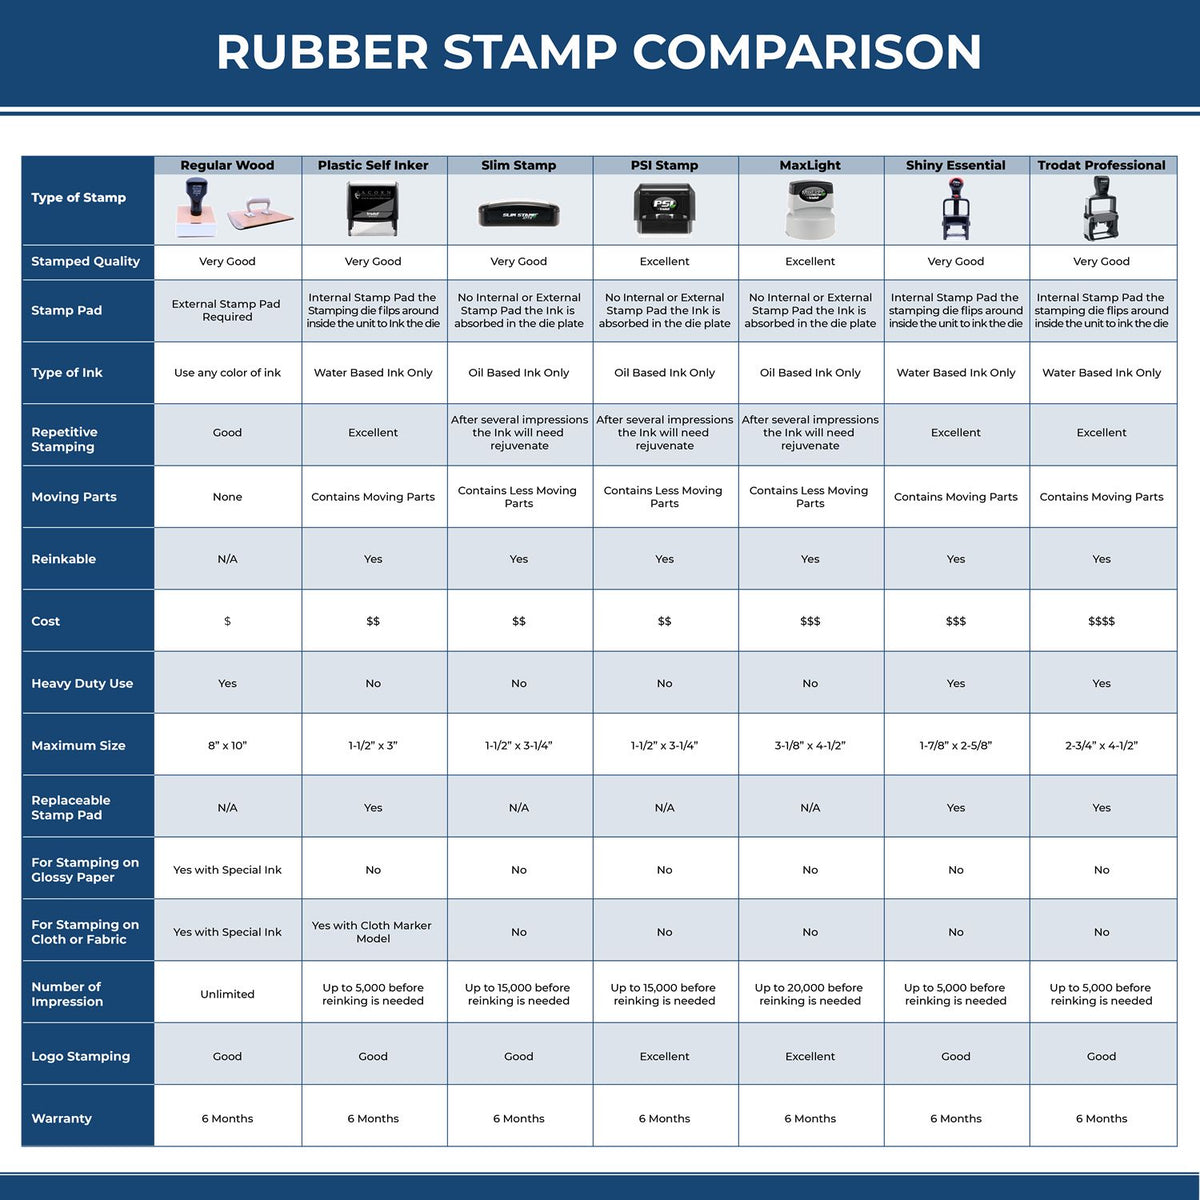 A comparison chart for the different types of mount models available for the MaxLight Premium Pre-Inked Pennsylvania Rectangular Notarial Stamp.